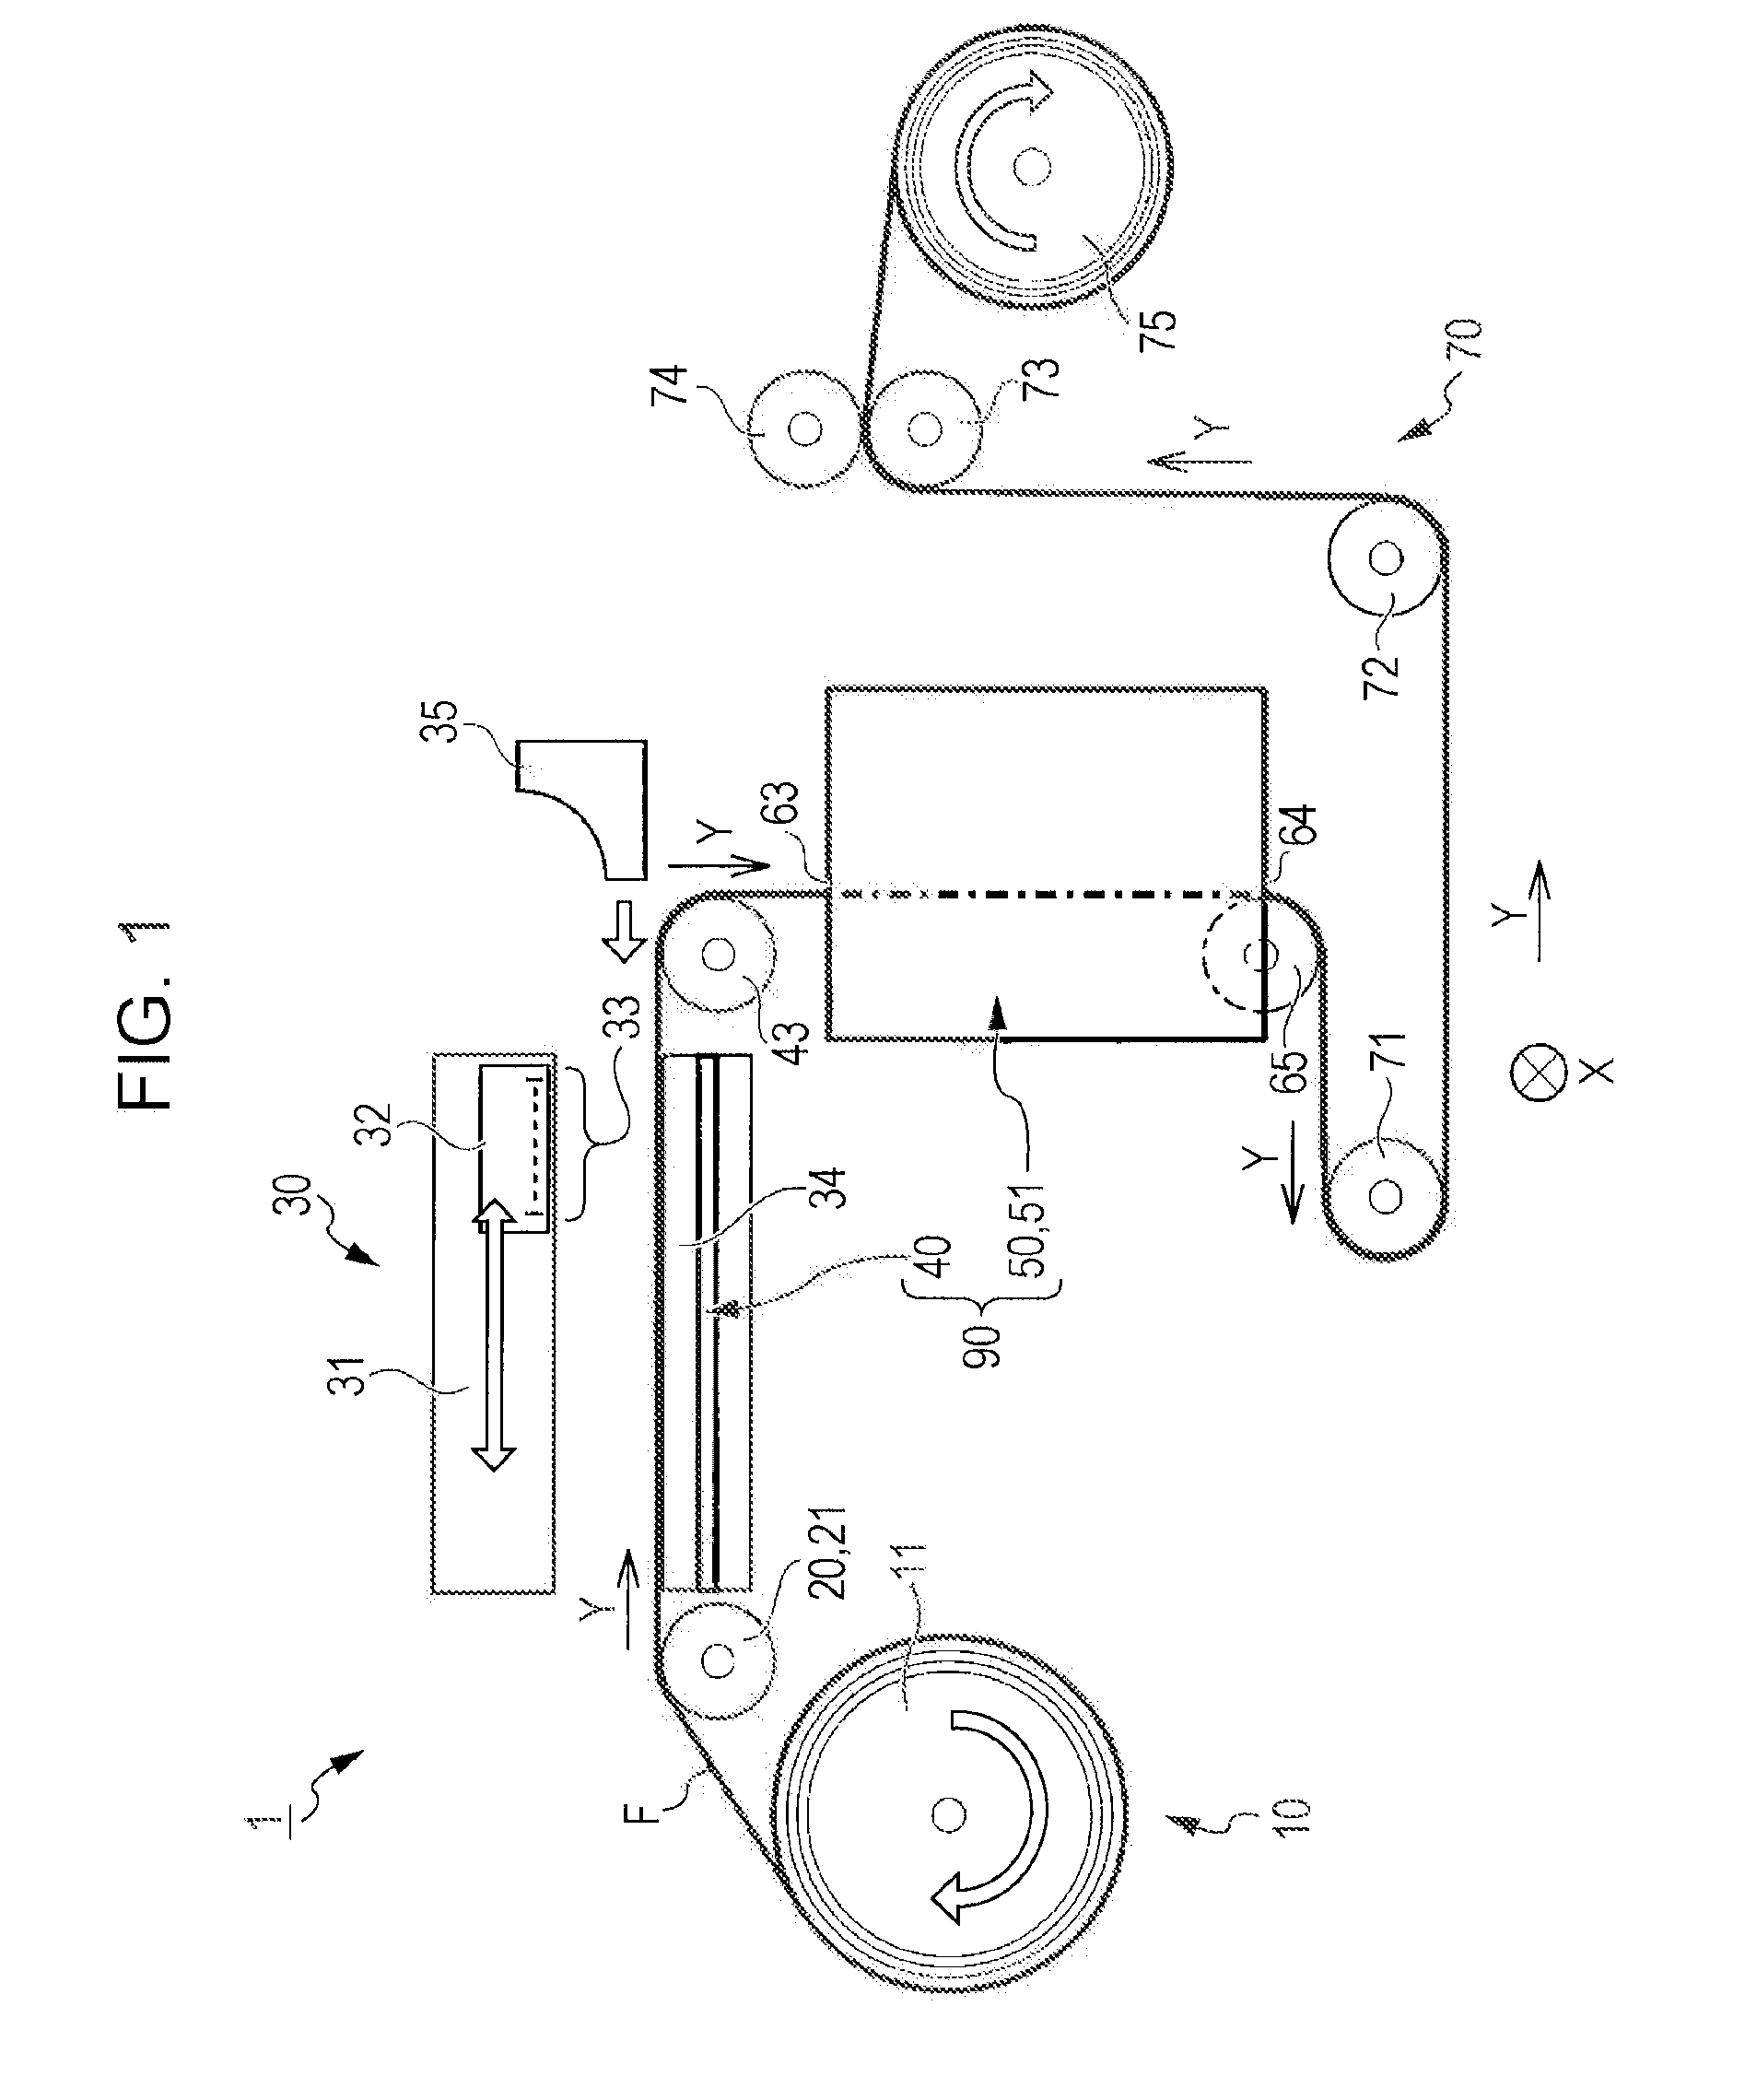 Ink jet recording system and recording method